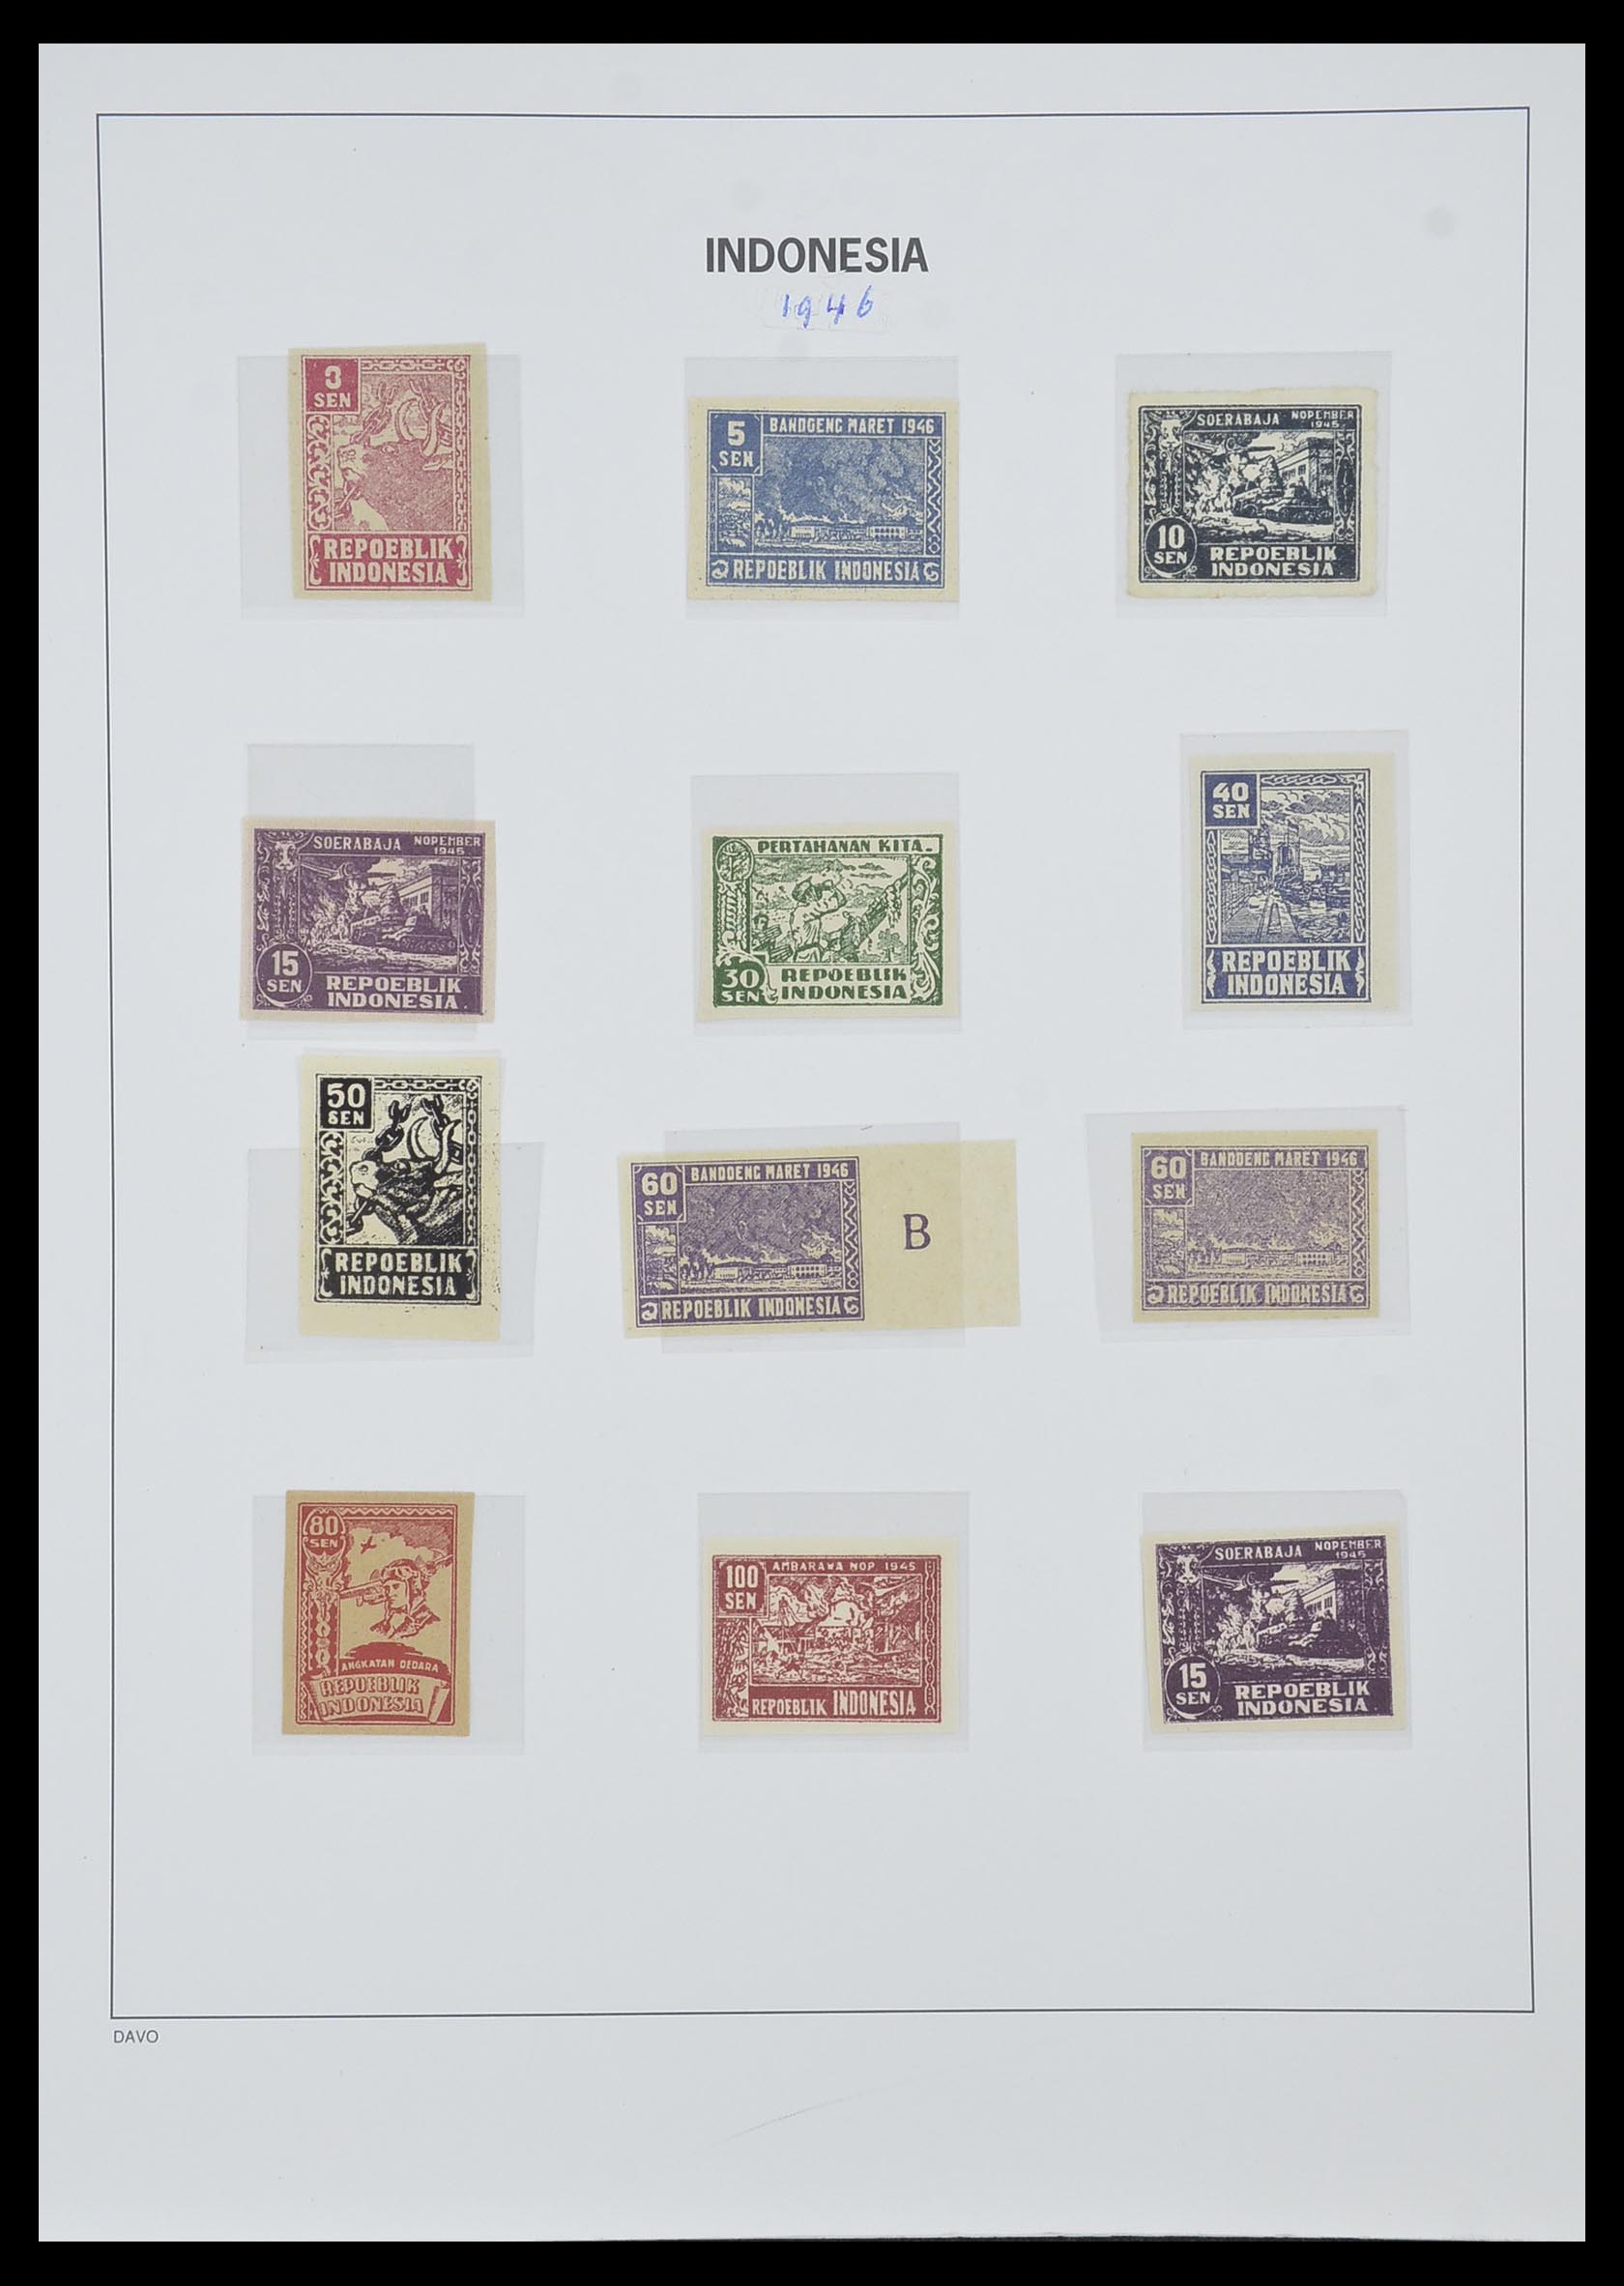 33988 007 - Stamp collection 33988 Vienna printings Indonesia.